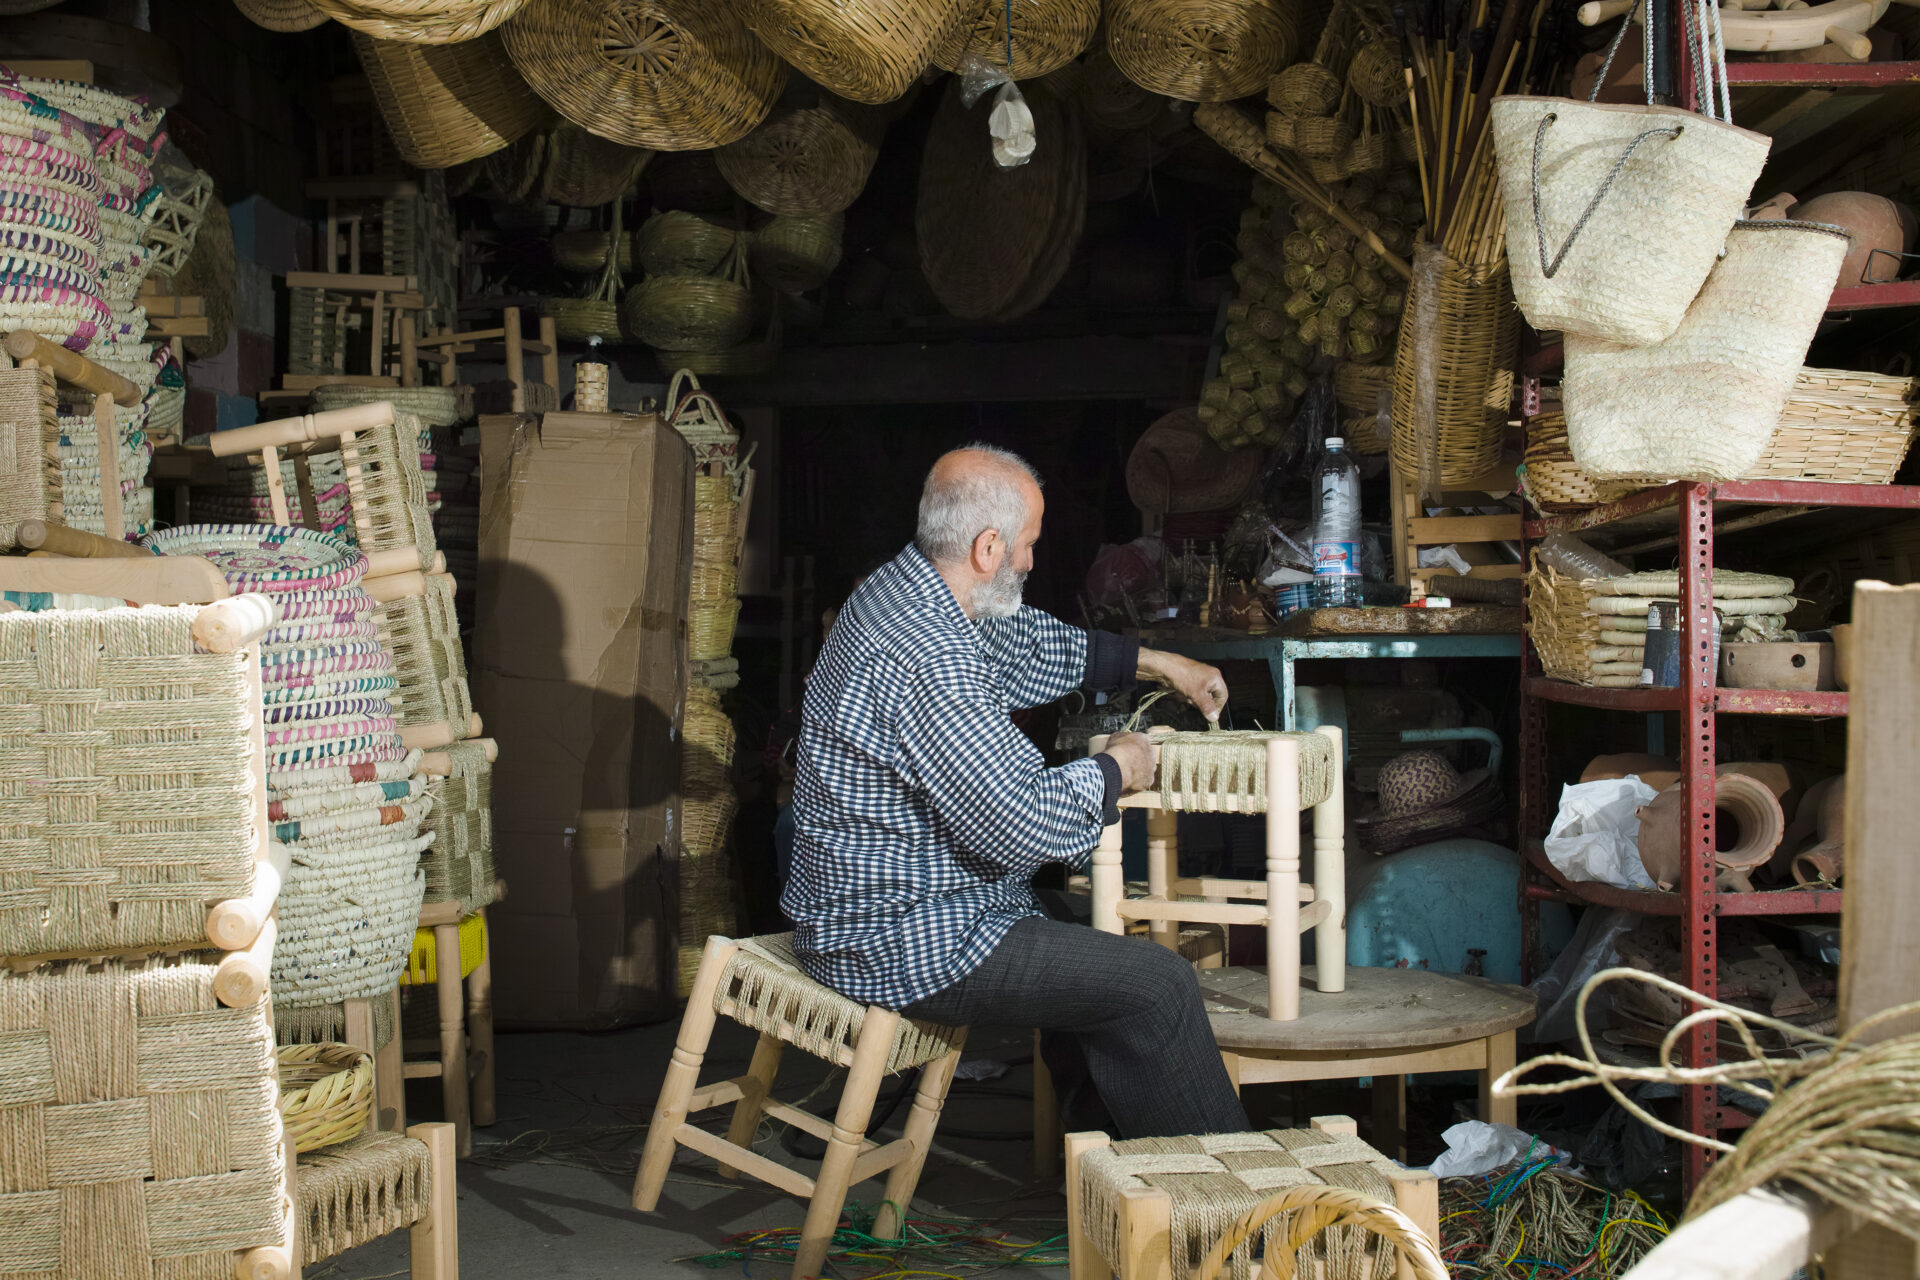 Arts and crafts in South Lebanon